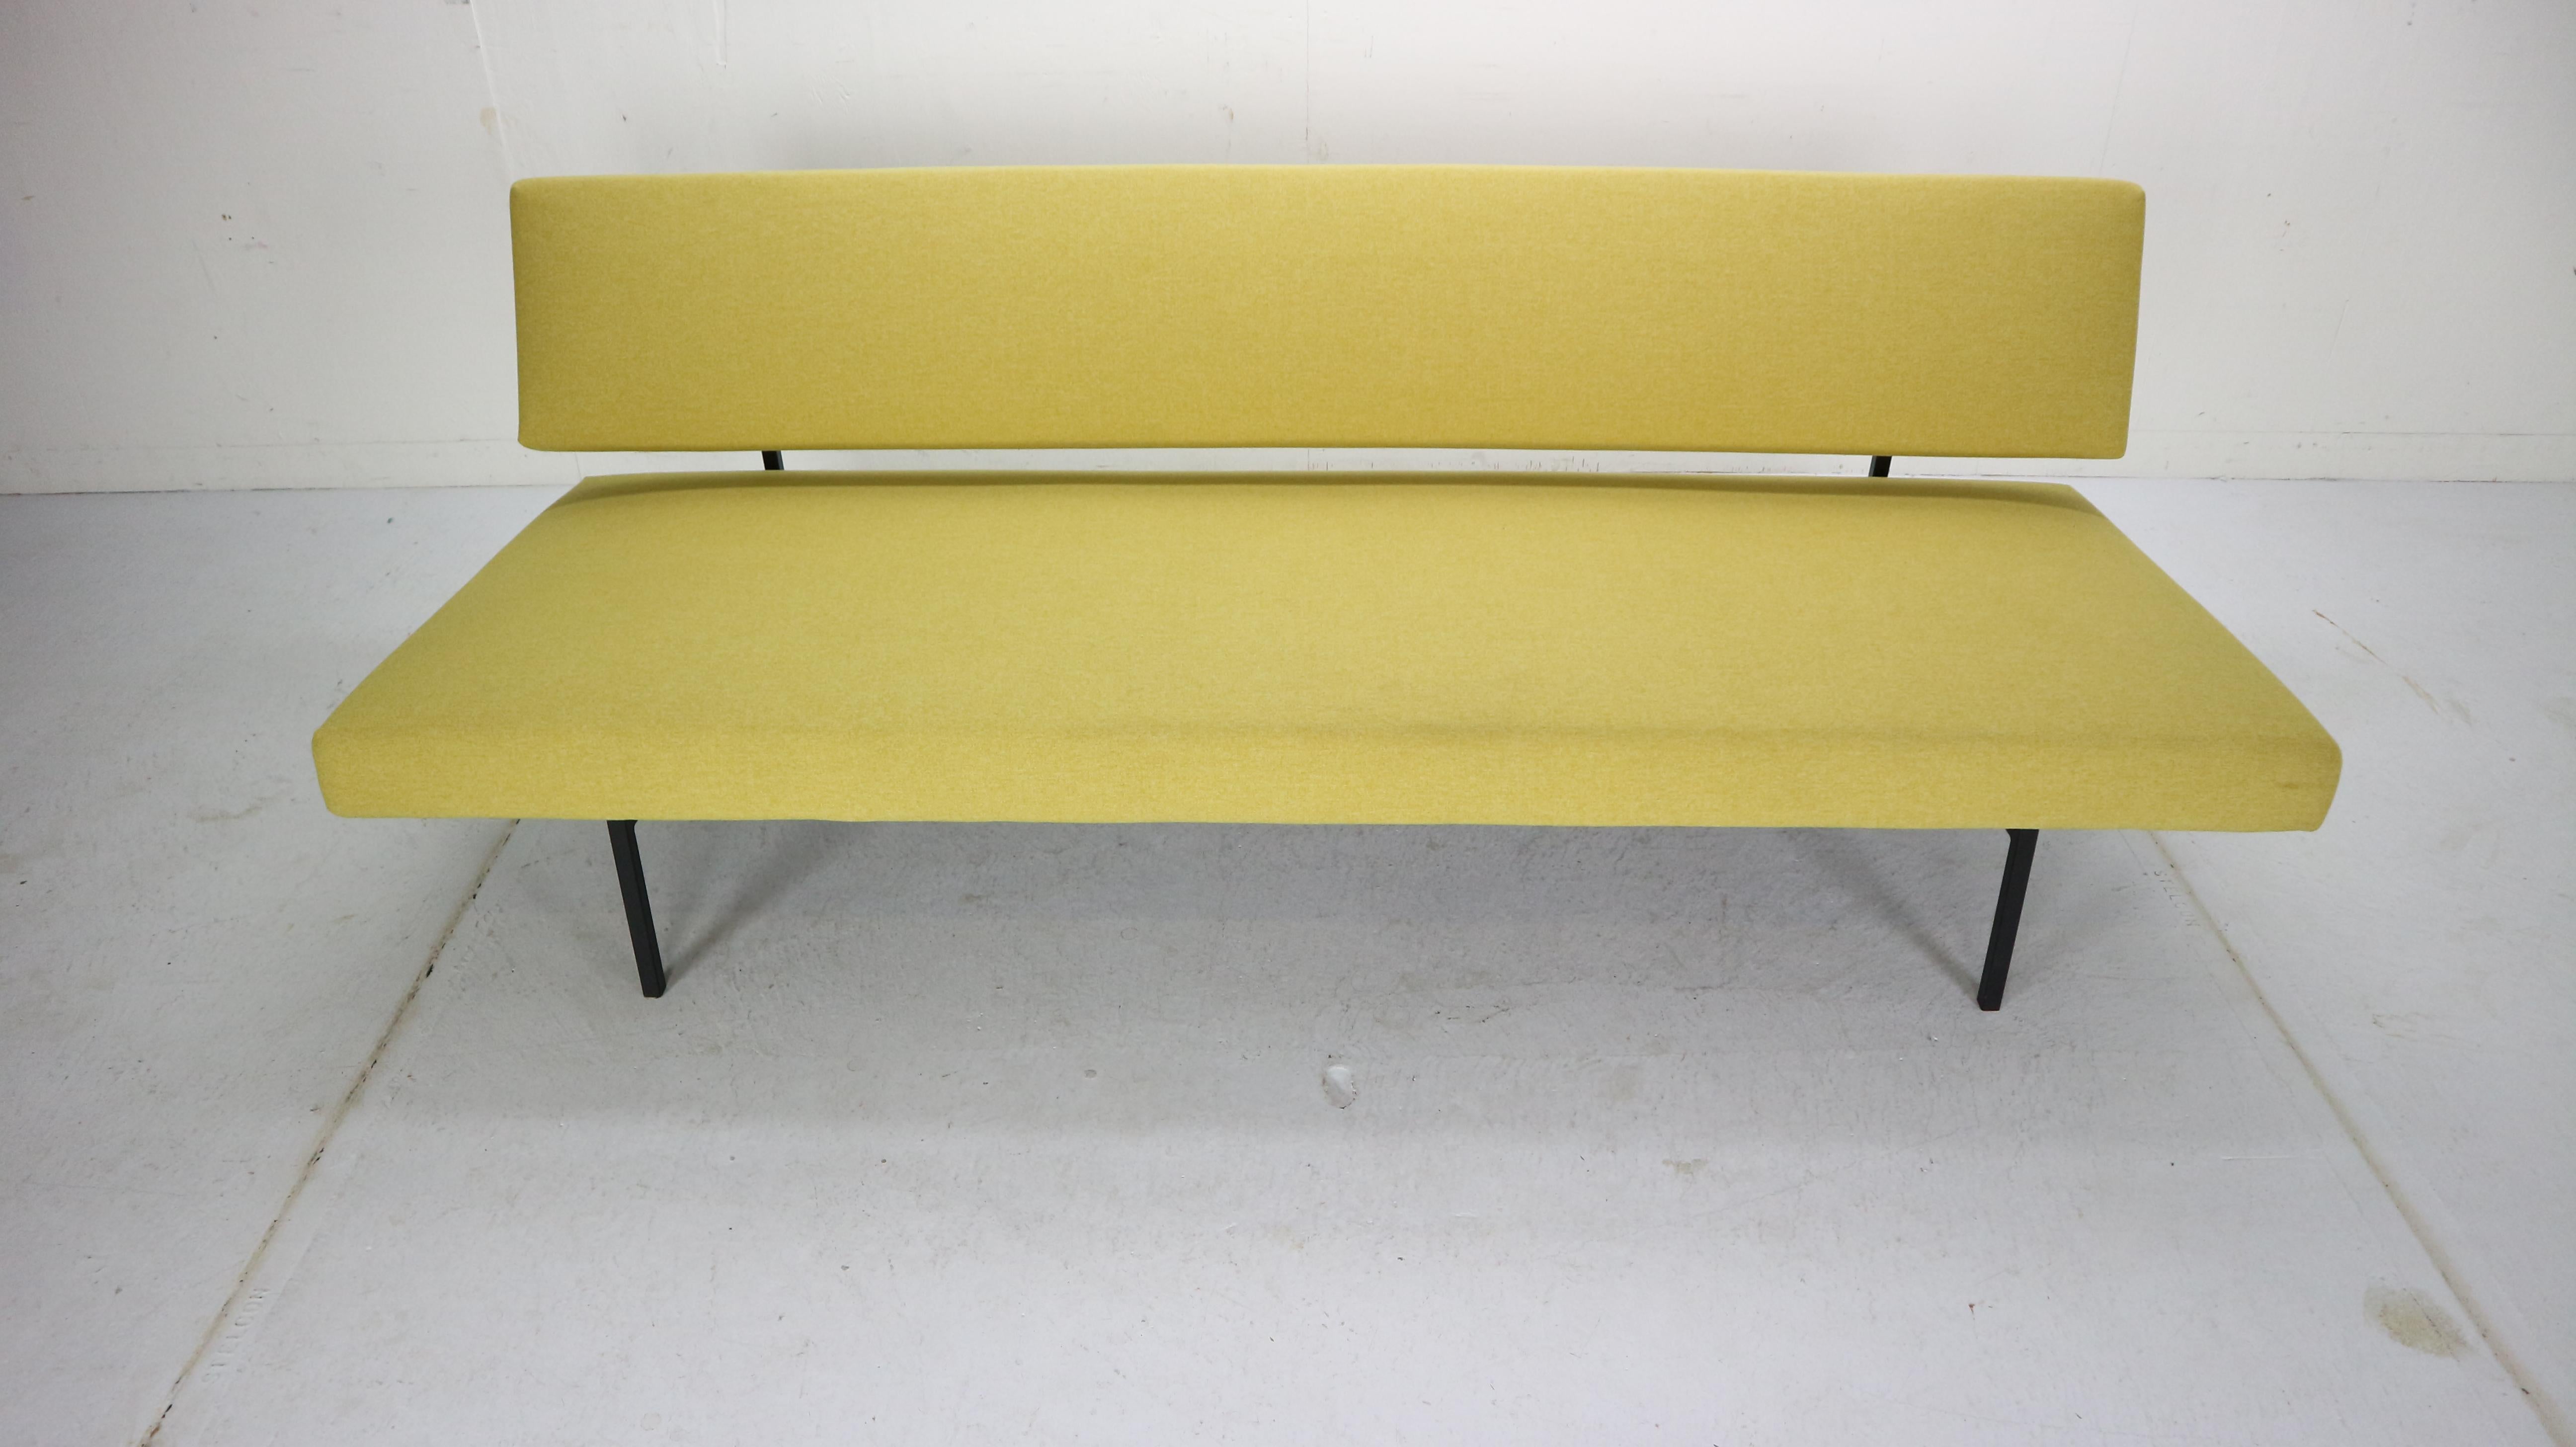 Mid-20th Century Rob Parry Daybed Sleeper Sofa for Gederland, Dutch Modern Design, 1960s